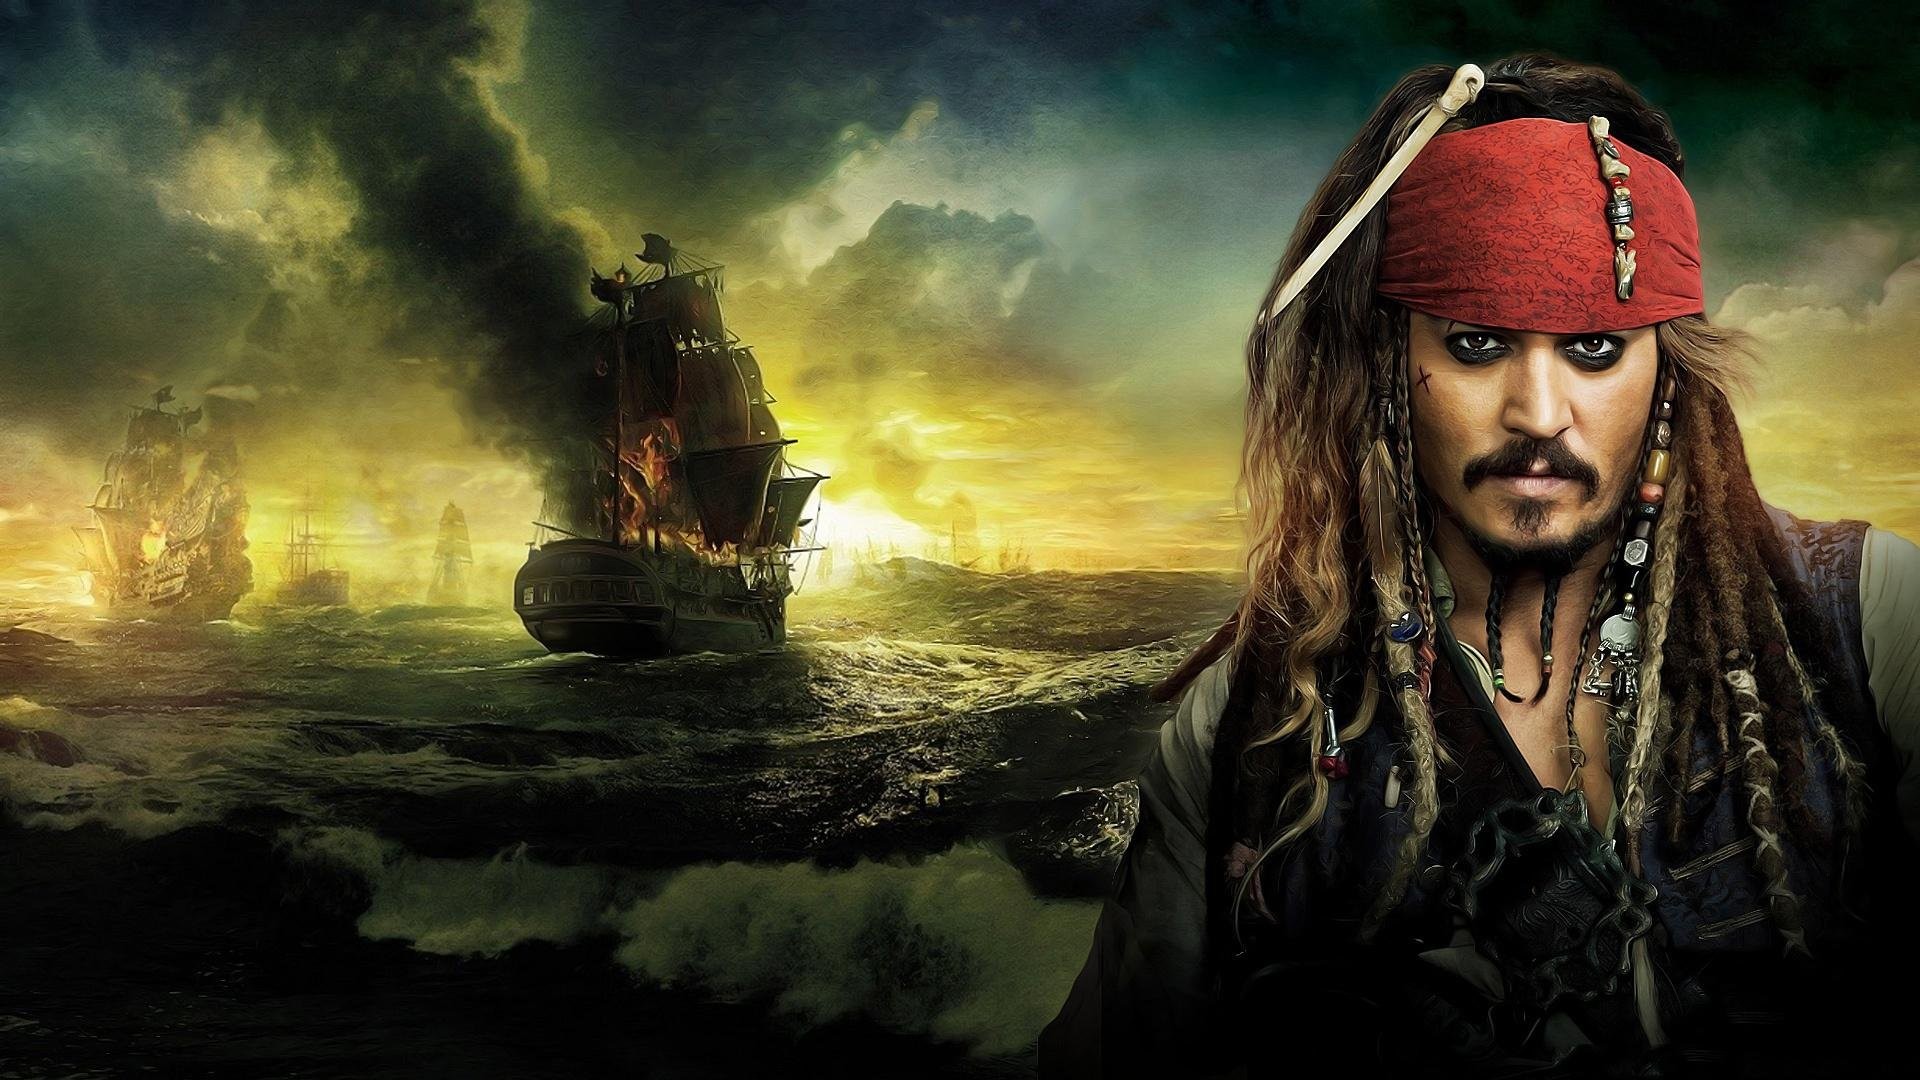 SIGNOOGLE Captain Jack Sparrow Johnny Depp Pirates of The Caribbean Movie  Actor Quotes Wallpaper for Home Multicolor 12 x 16 Inch  Amazonin  Home  Kitchen